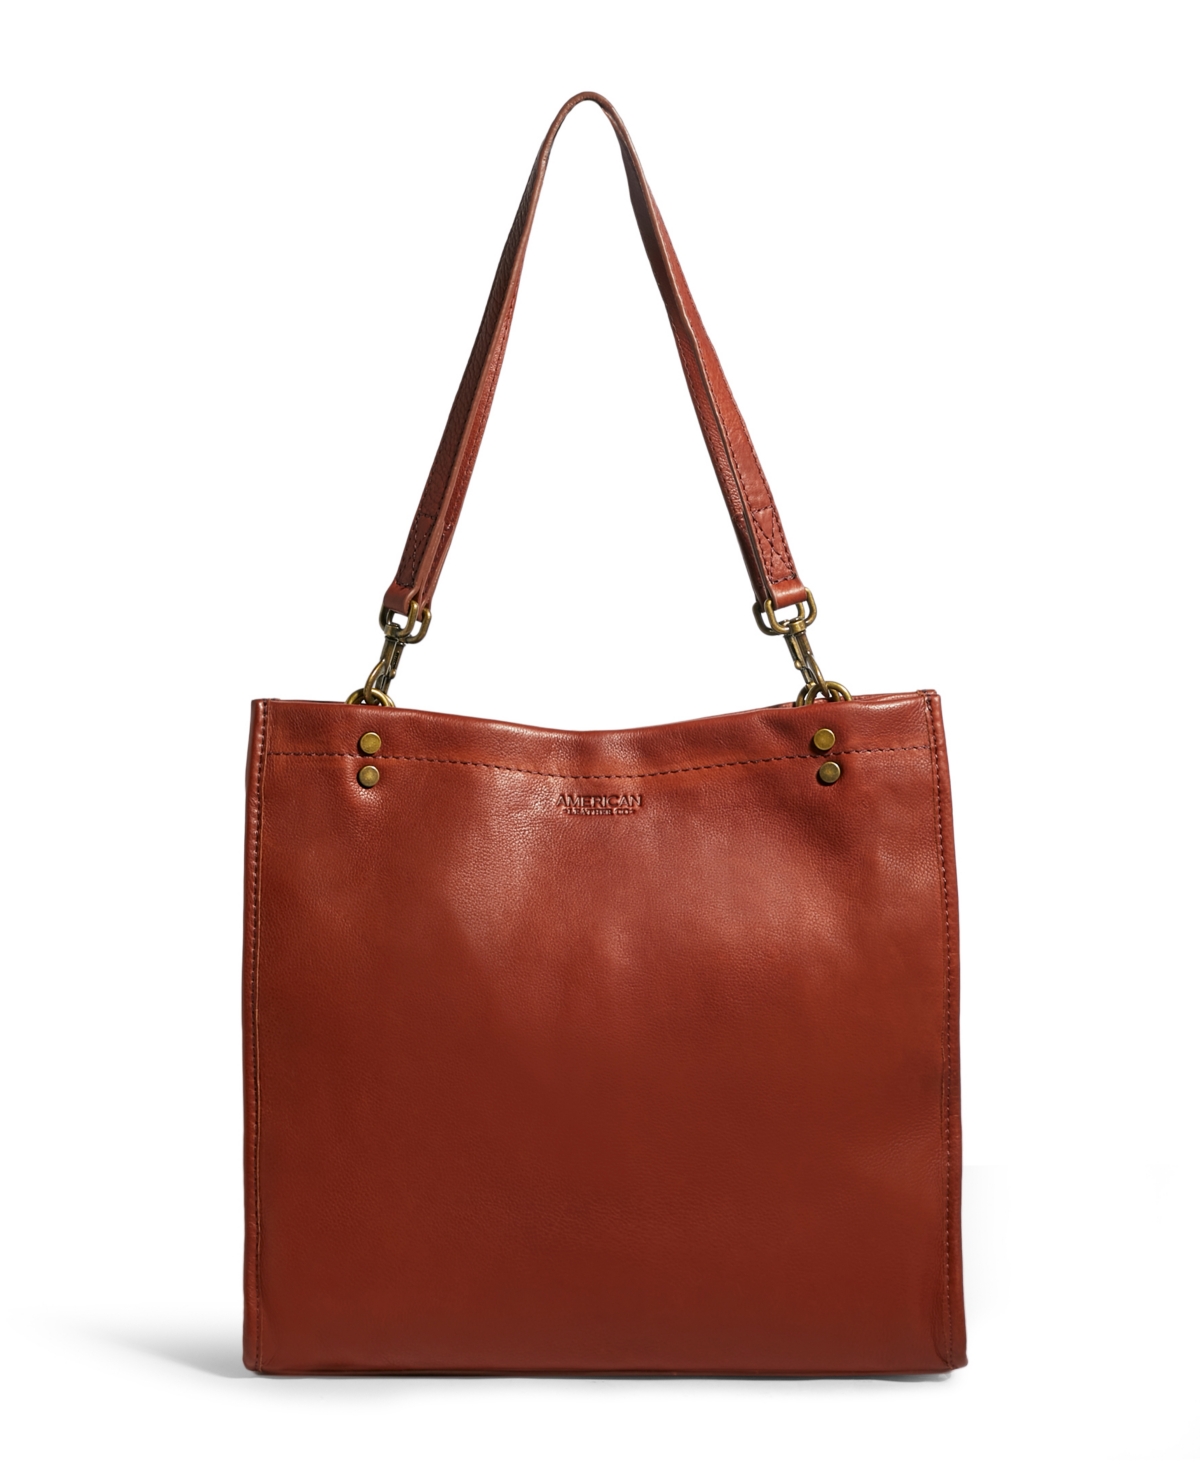 Women's Hope Tote Bag - White smooth